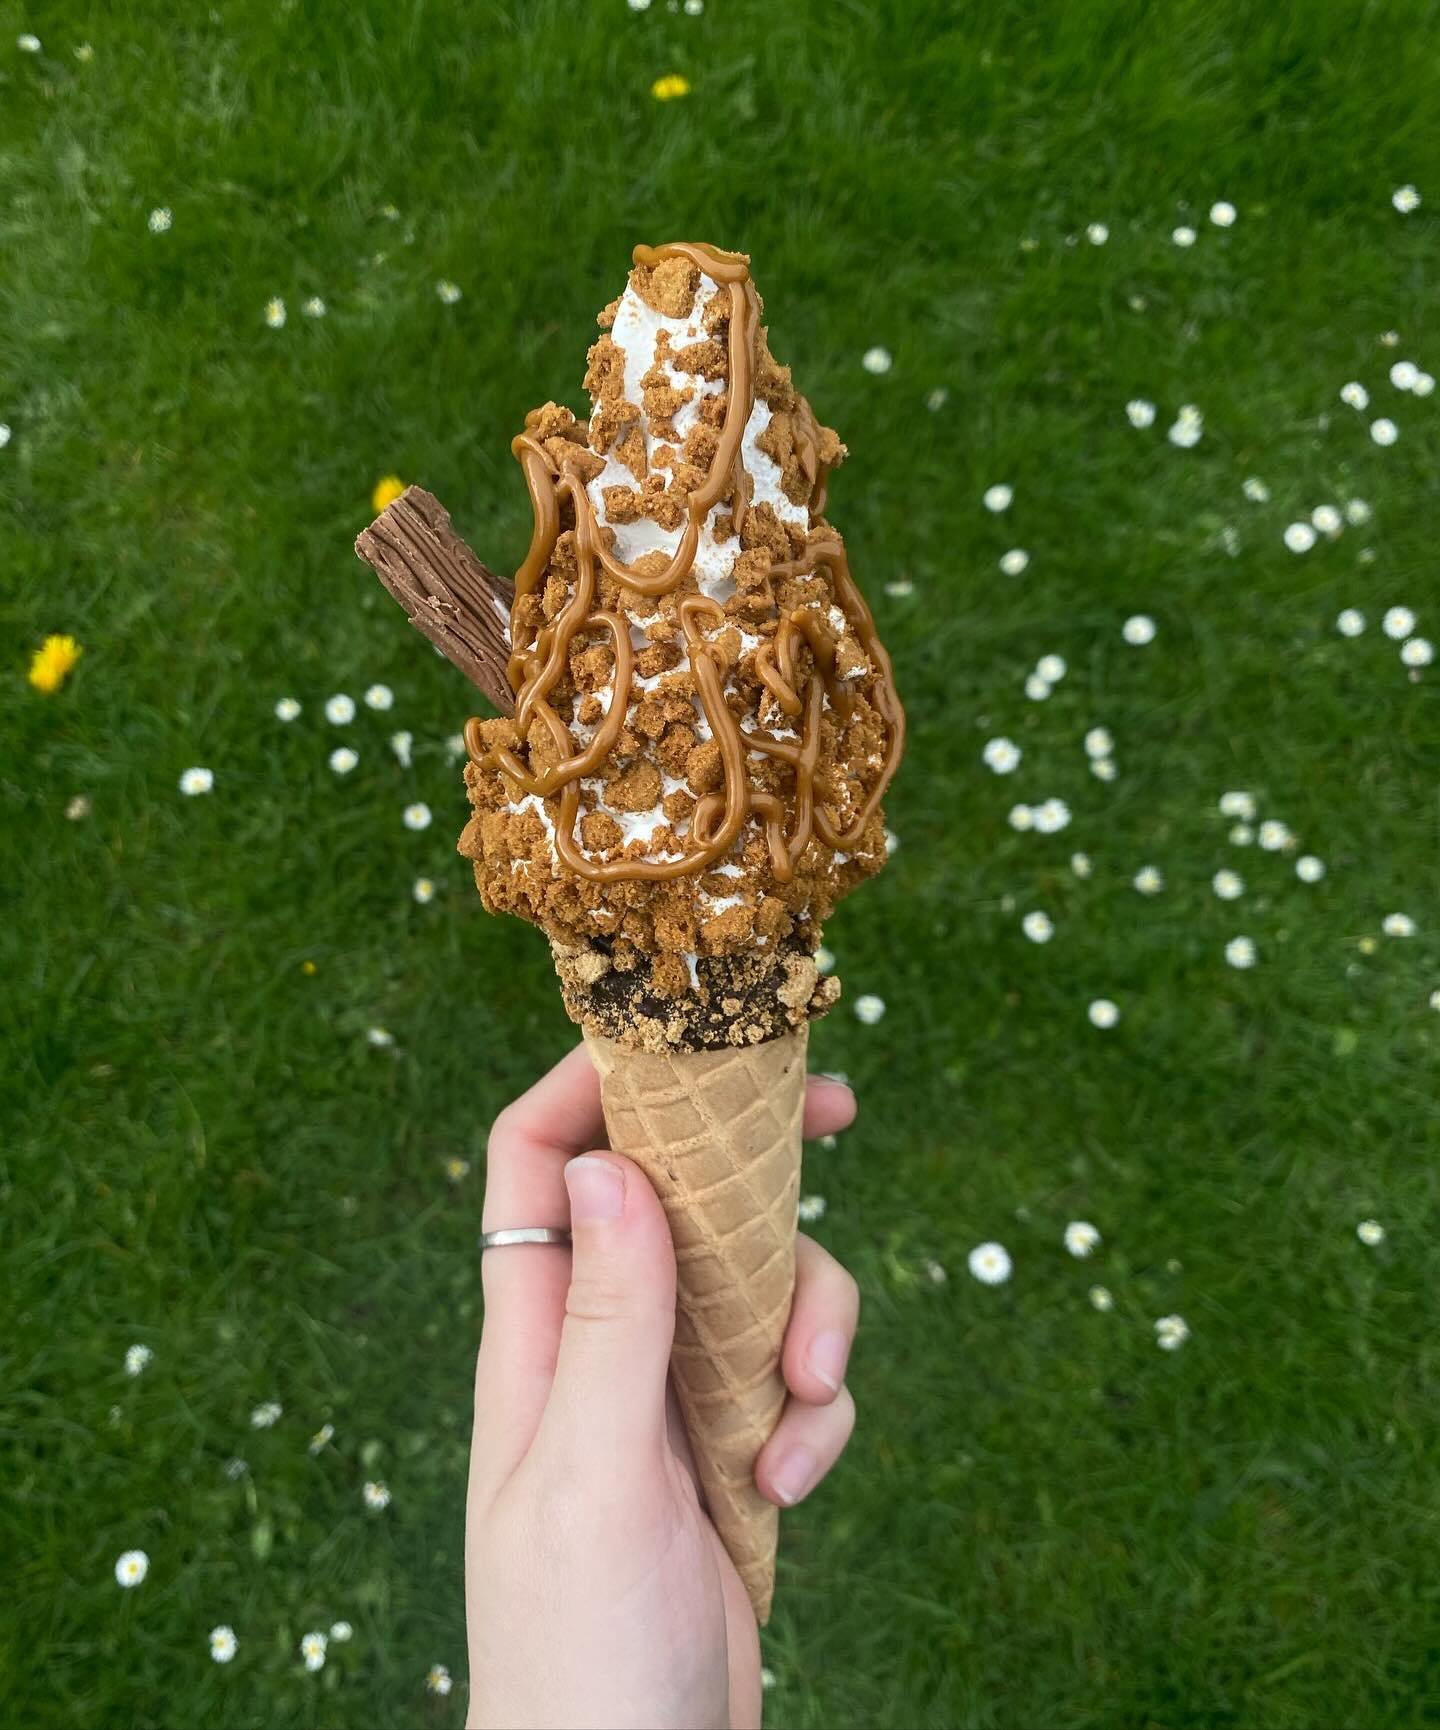 Who&rsquo;s coming to get ice cream today?? 🍦🍦

#lewisbrosicecream #icecream #icecreamlover #flake #icecreamvan #sweet #sweettreats #vanlife #dessert #local #warrington #manchester #manchesterfood #cheshire #warringtonbusiness #desserts #sunny #bis